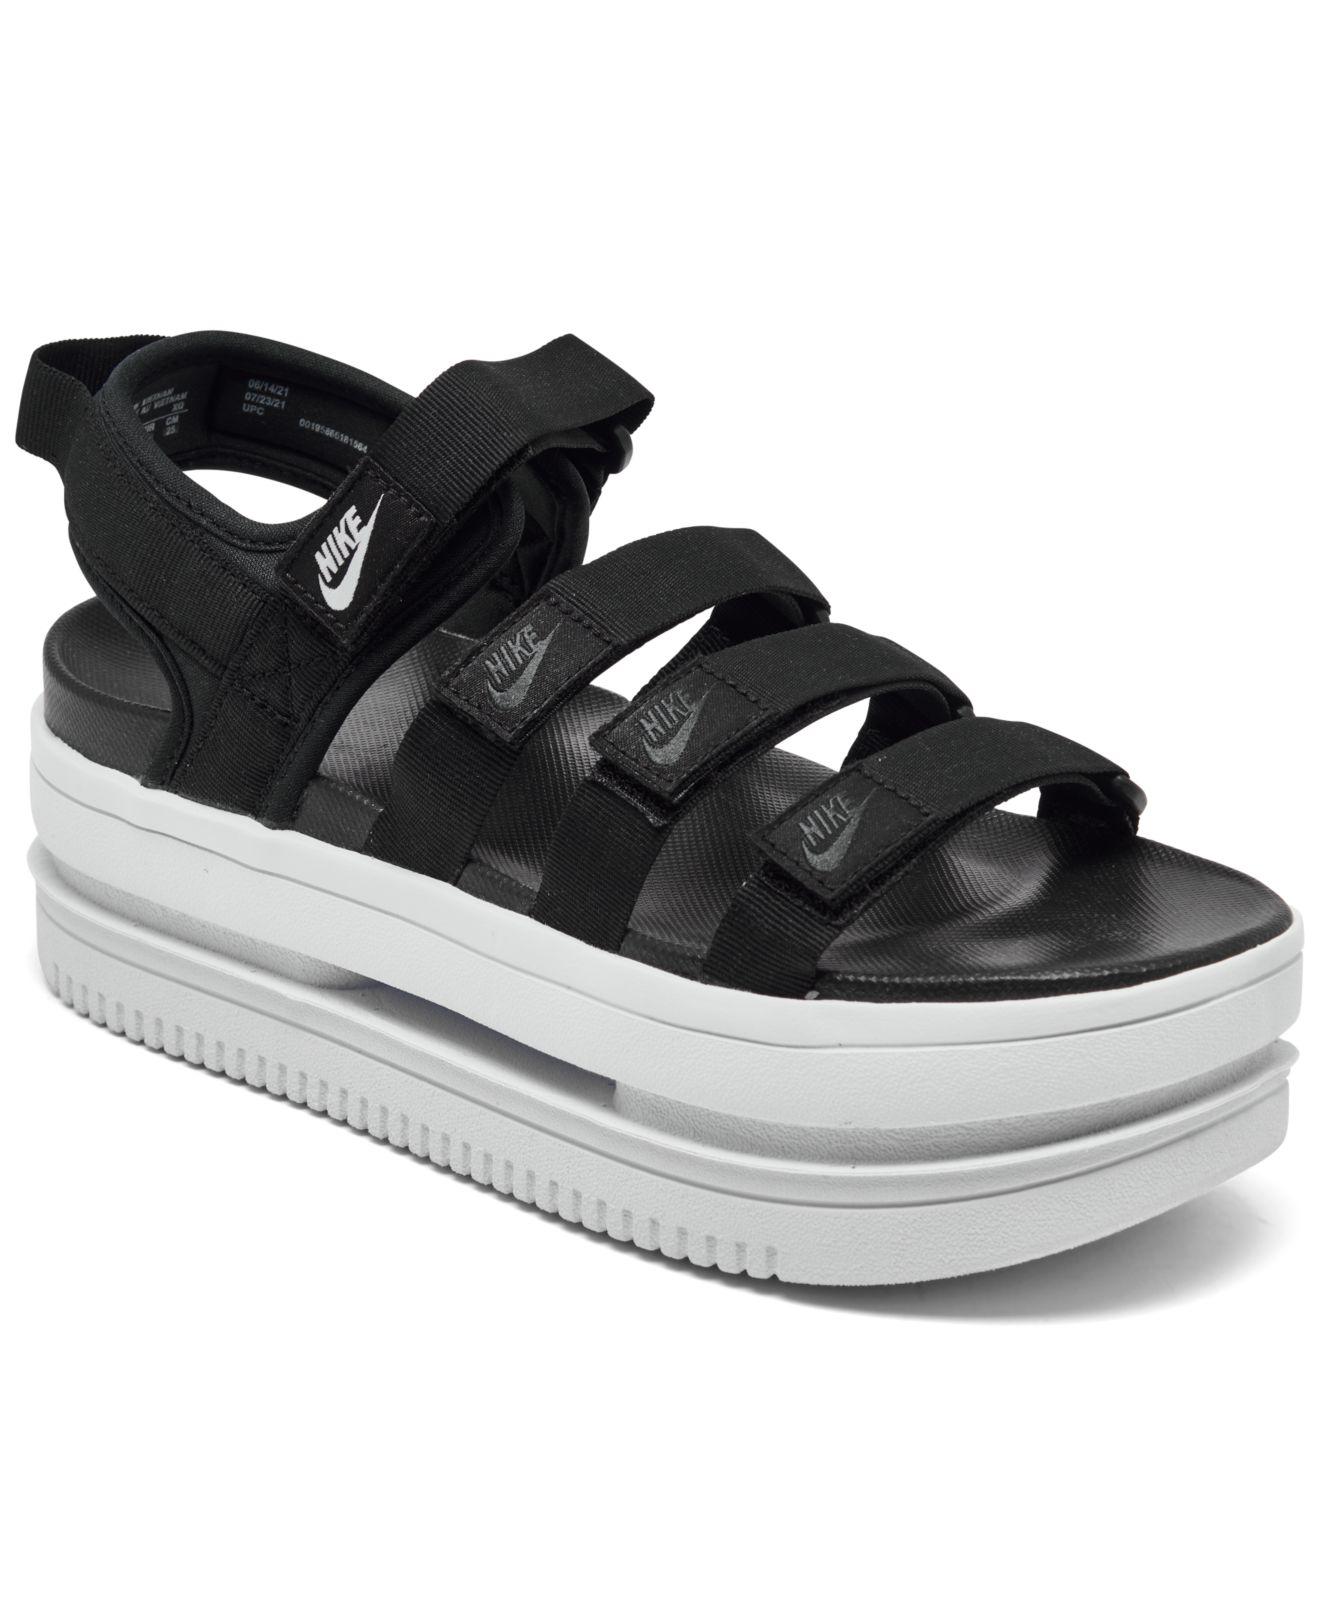 Nike Icon Classic Sandals From Finish Line in Black | Lyst